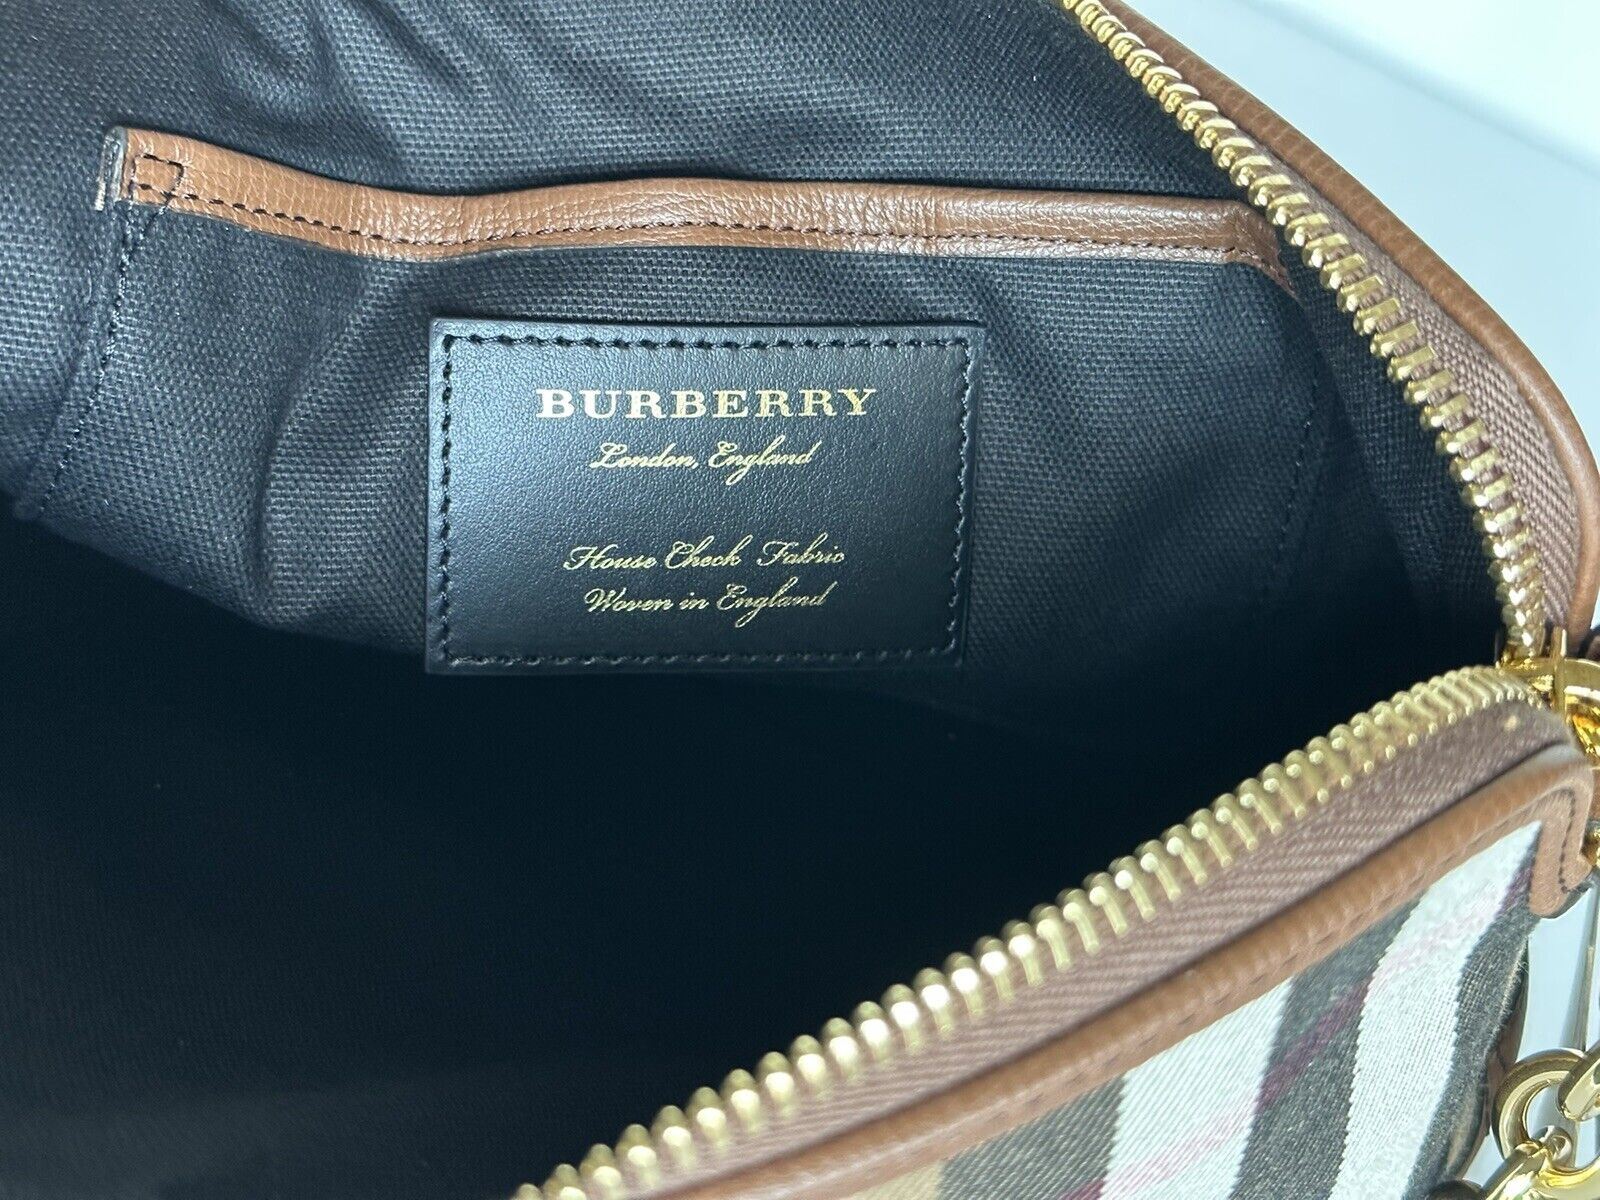 NWT Burberry Abingdon House Check Derby Leather Shoulder Bag Tan 40147391 Italy